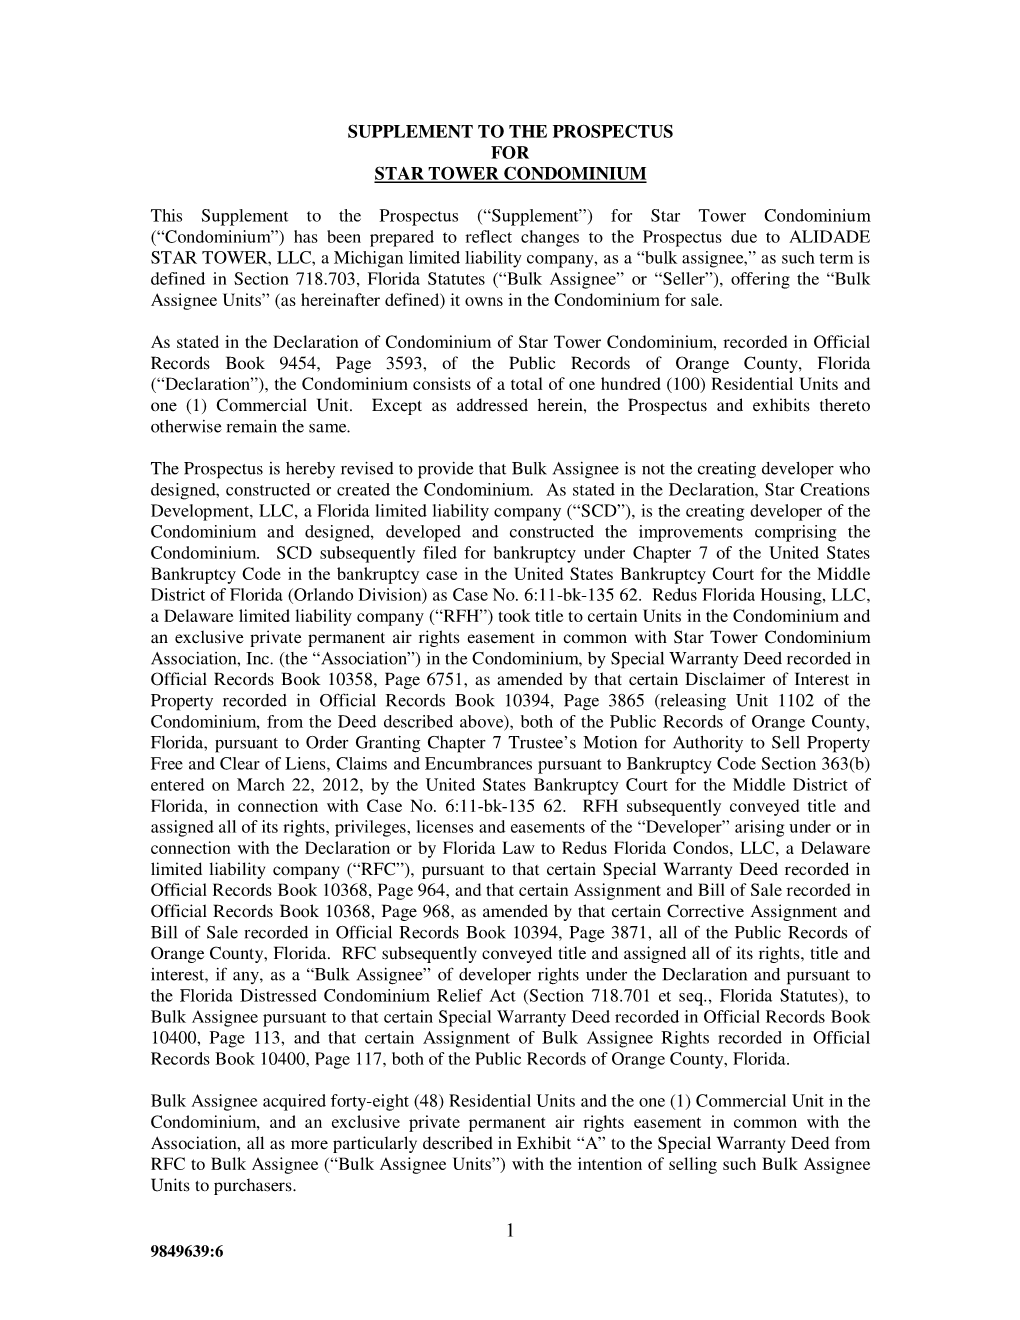 SUPPLEMENT to the PROSPECTUS for STAR TOWER CONDOMINIUM This Supplement to the Prospectus (“Supplement”) for Star Tower Cond